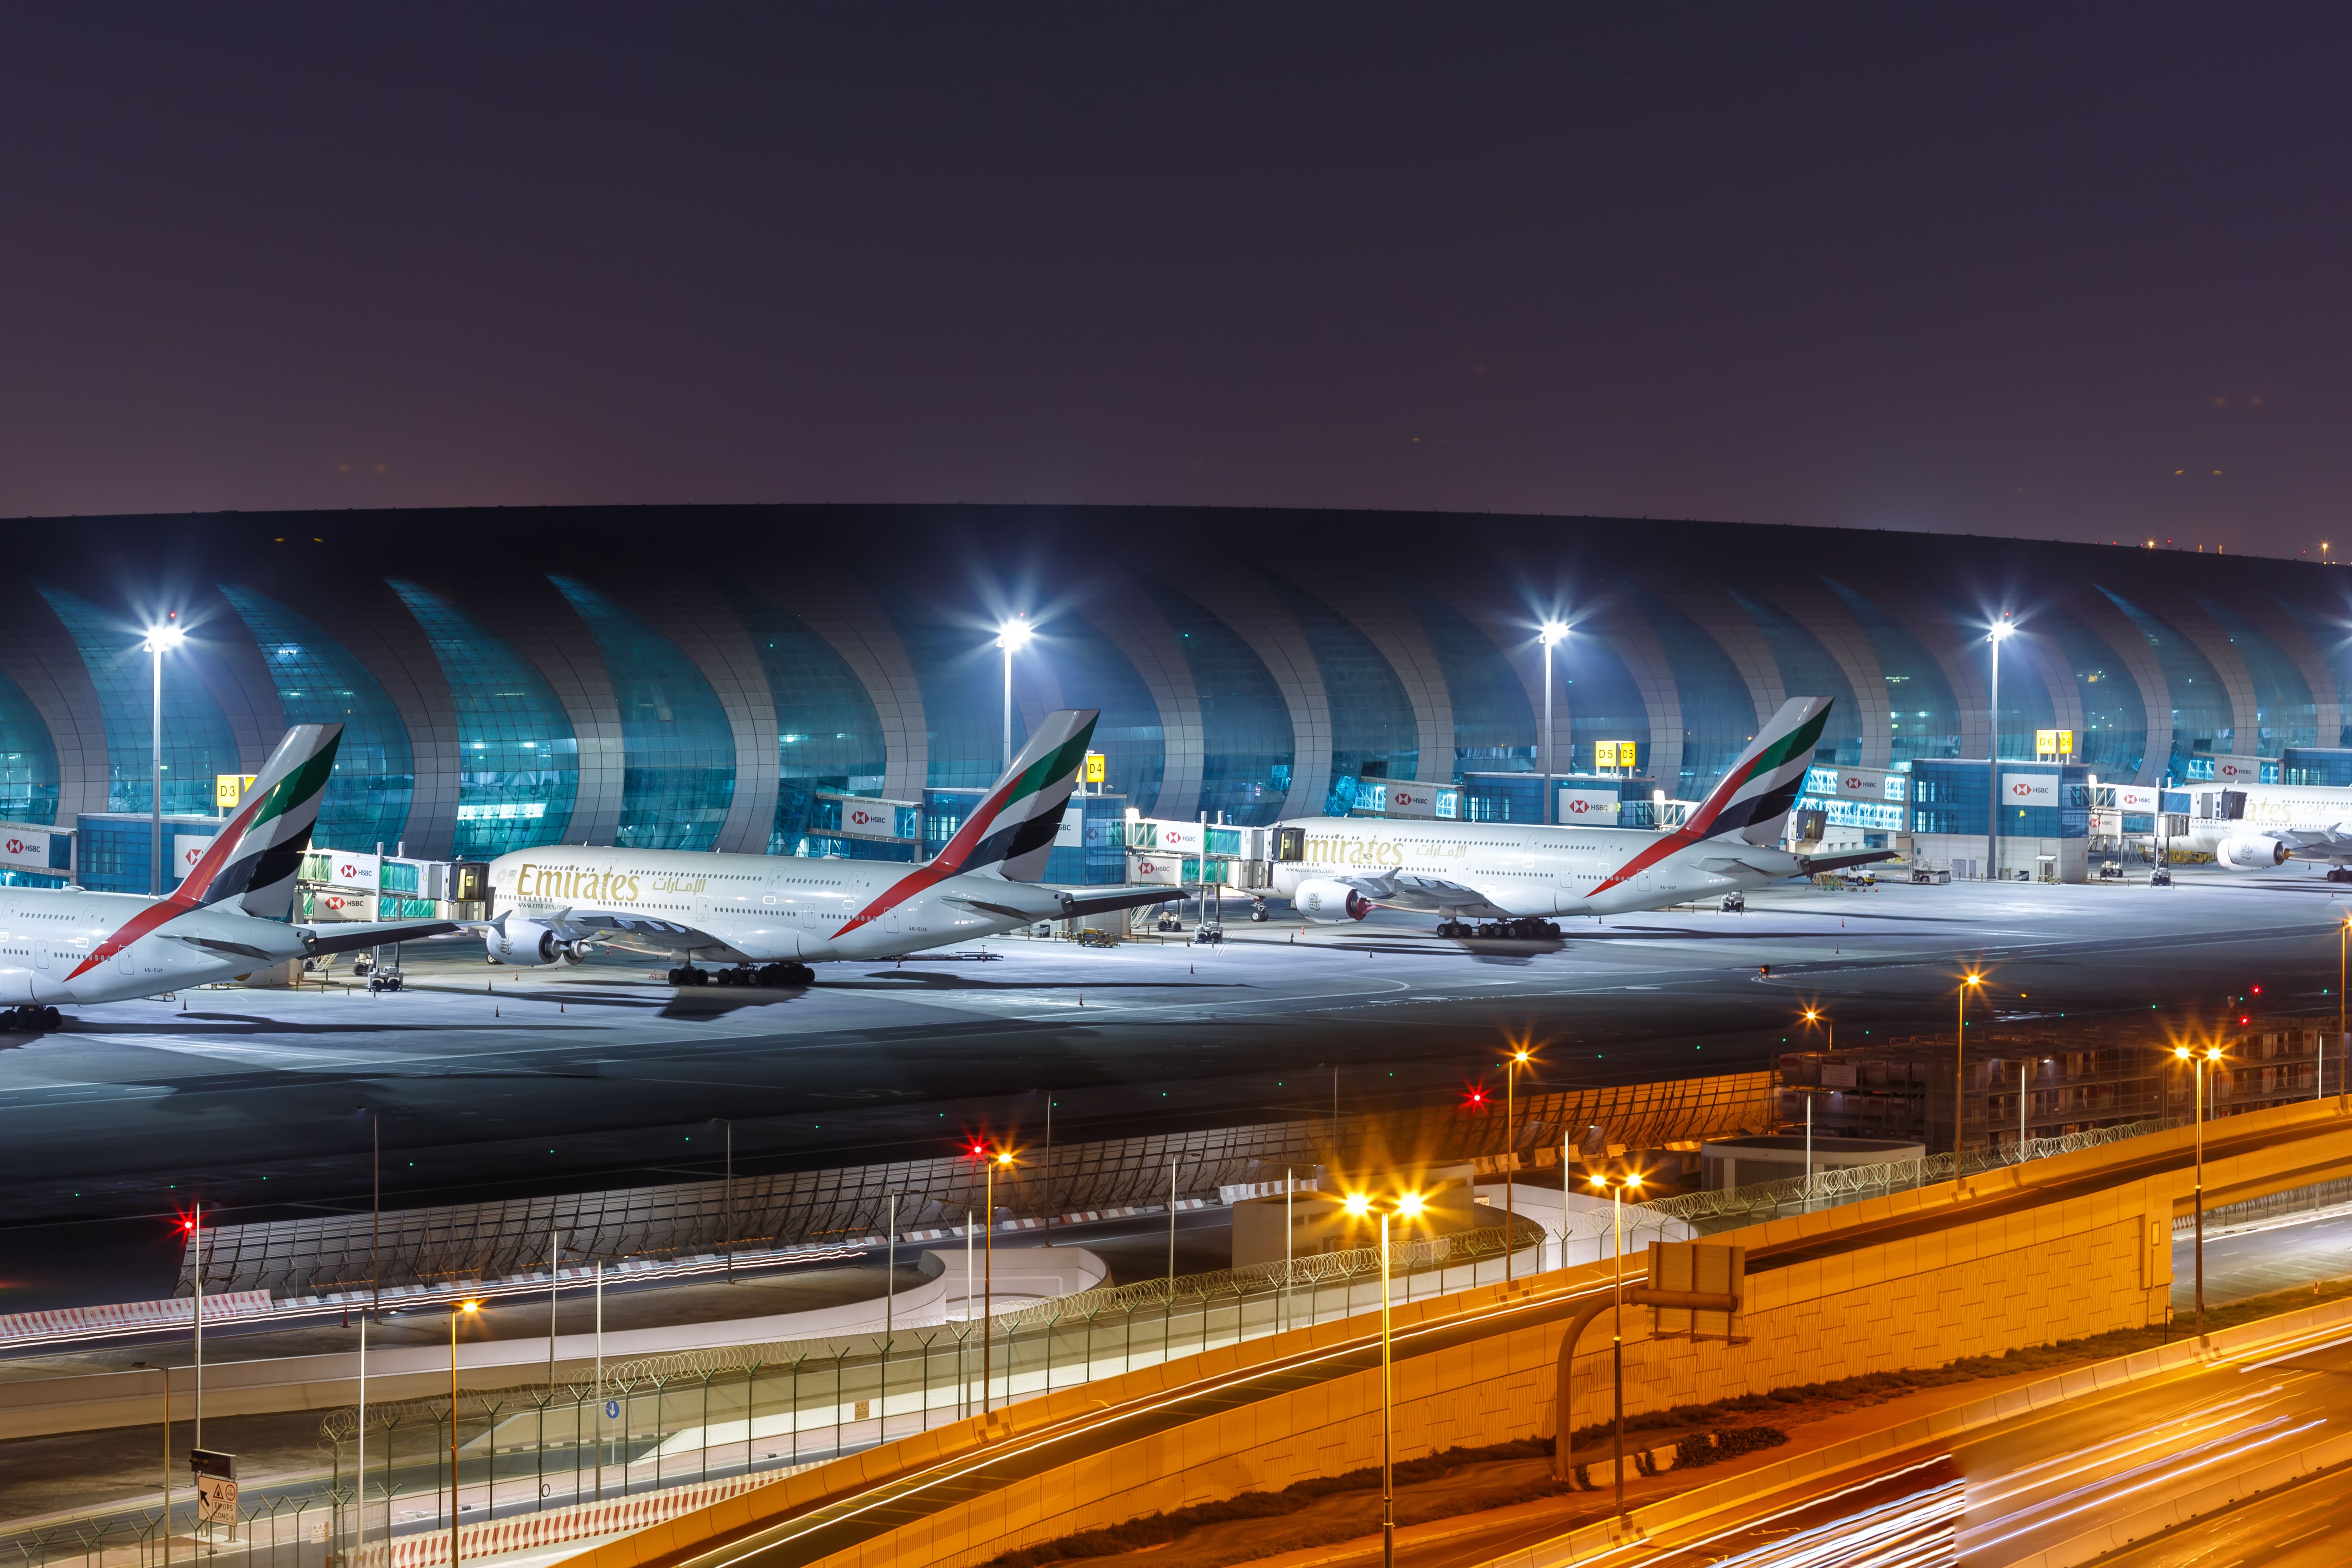 Several Emirates Airbus A380s parked at Dubai International Airport.